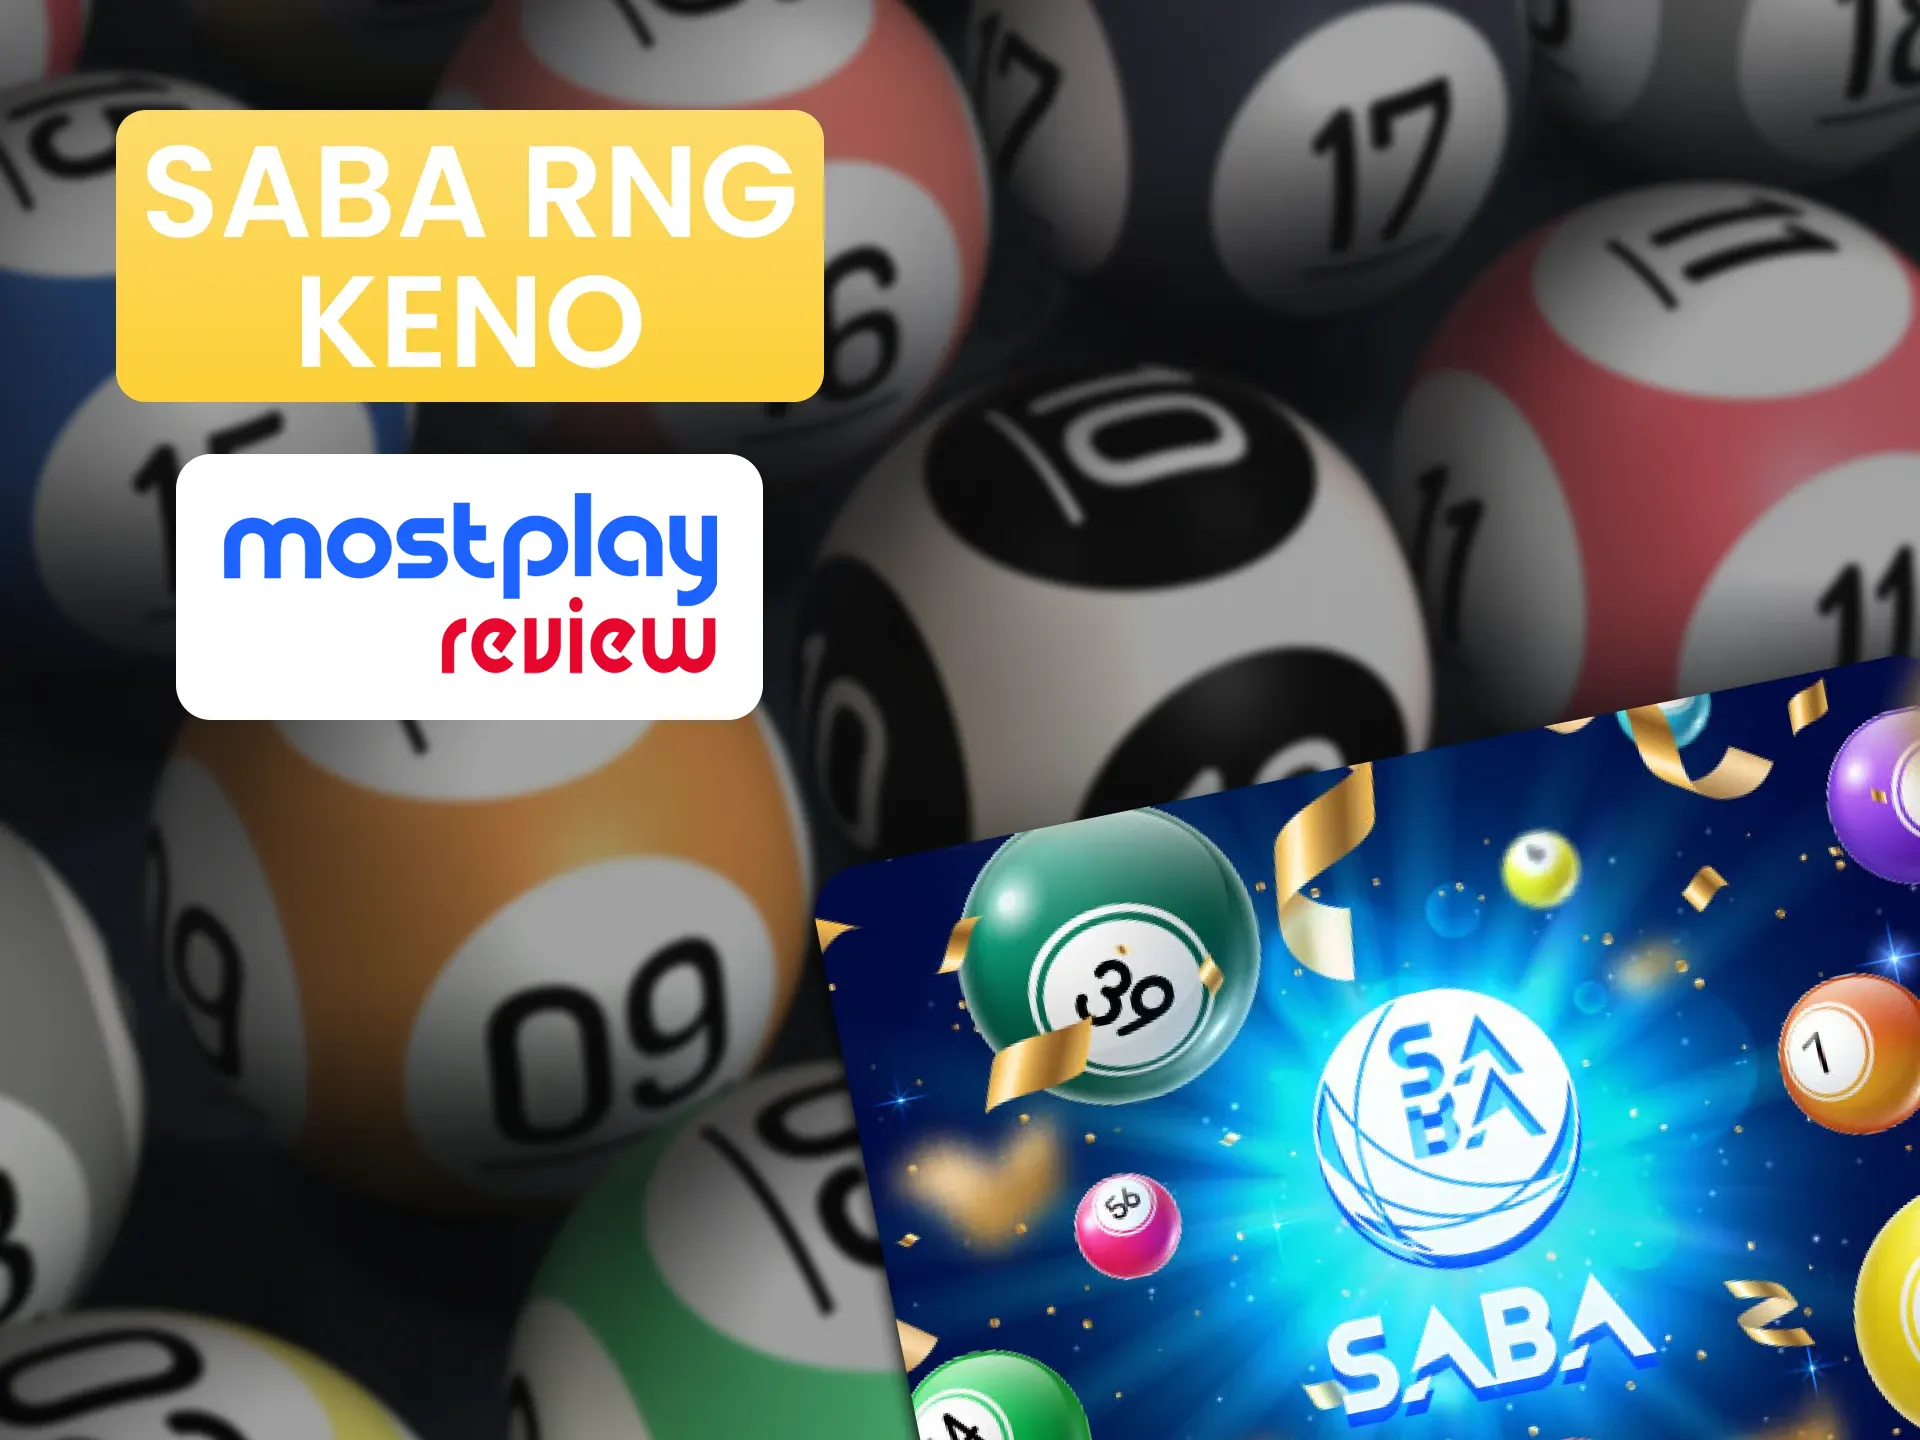 The Keno lottery game is a great way to play at the Mostplay.